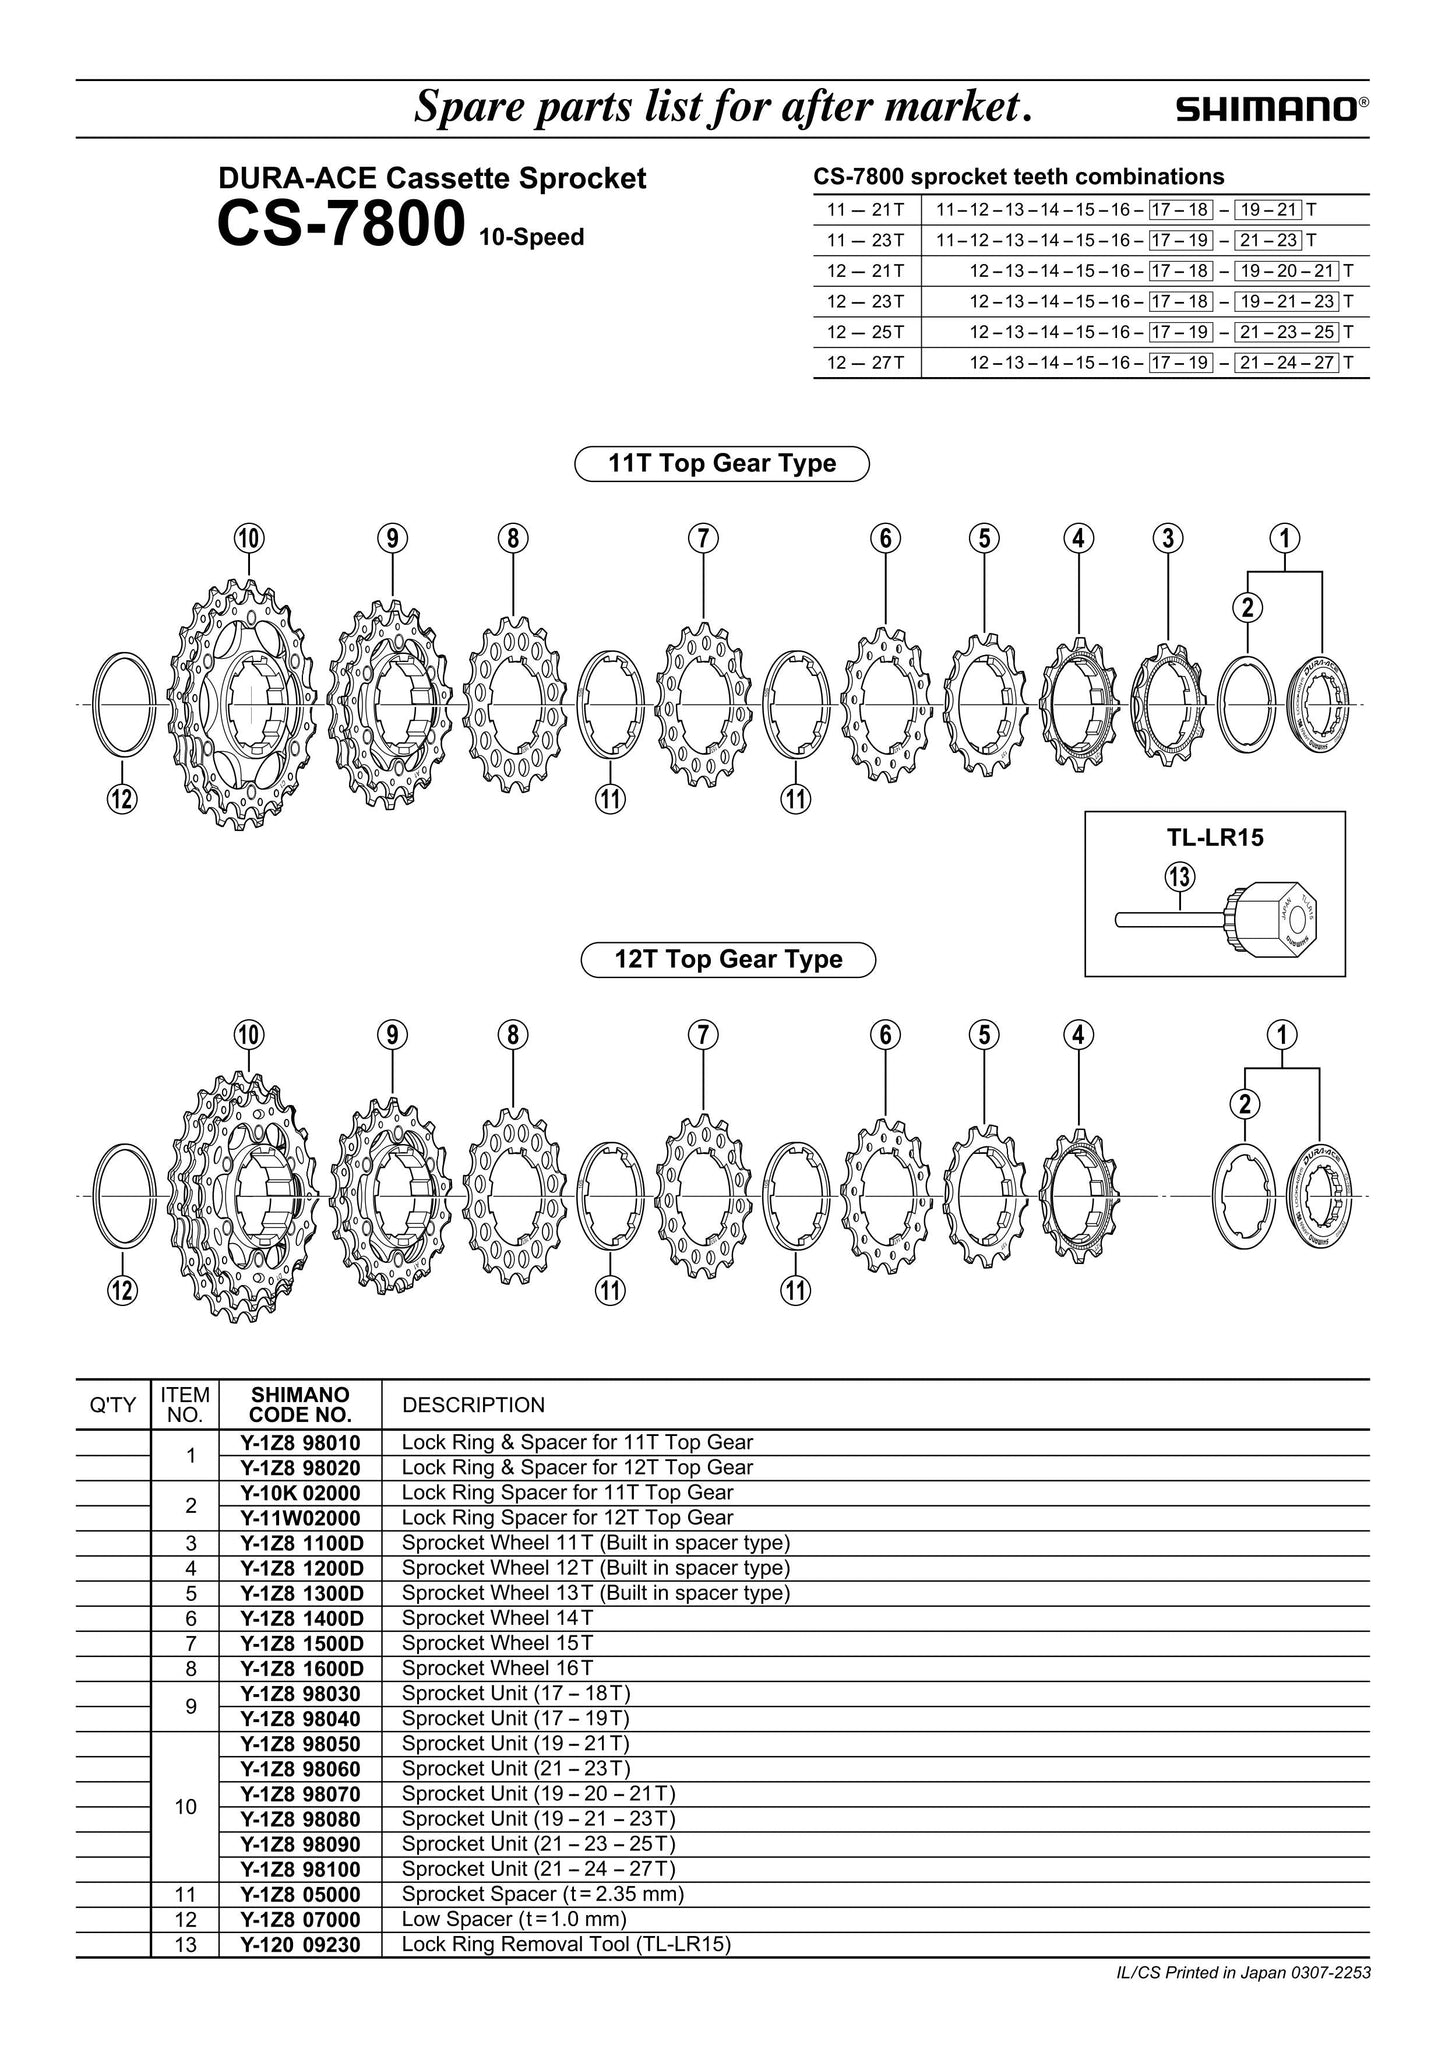 SHIMANO Dura-Ace CS-7800 Cassette Sprocket Low Spacer (T=2.35MM) - (10-Speed) - Y1Z805000-Pit Crew Cycles